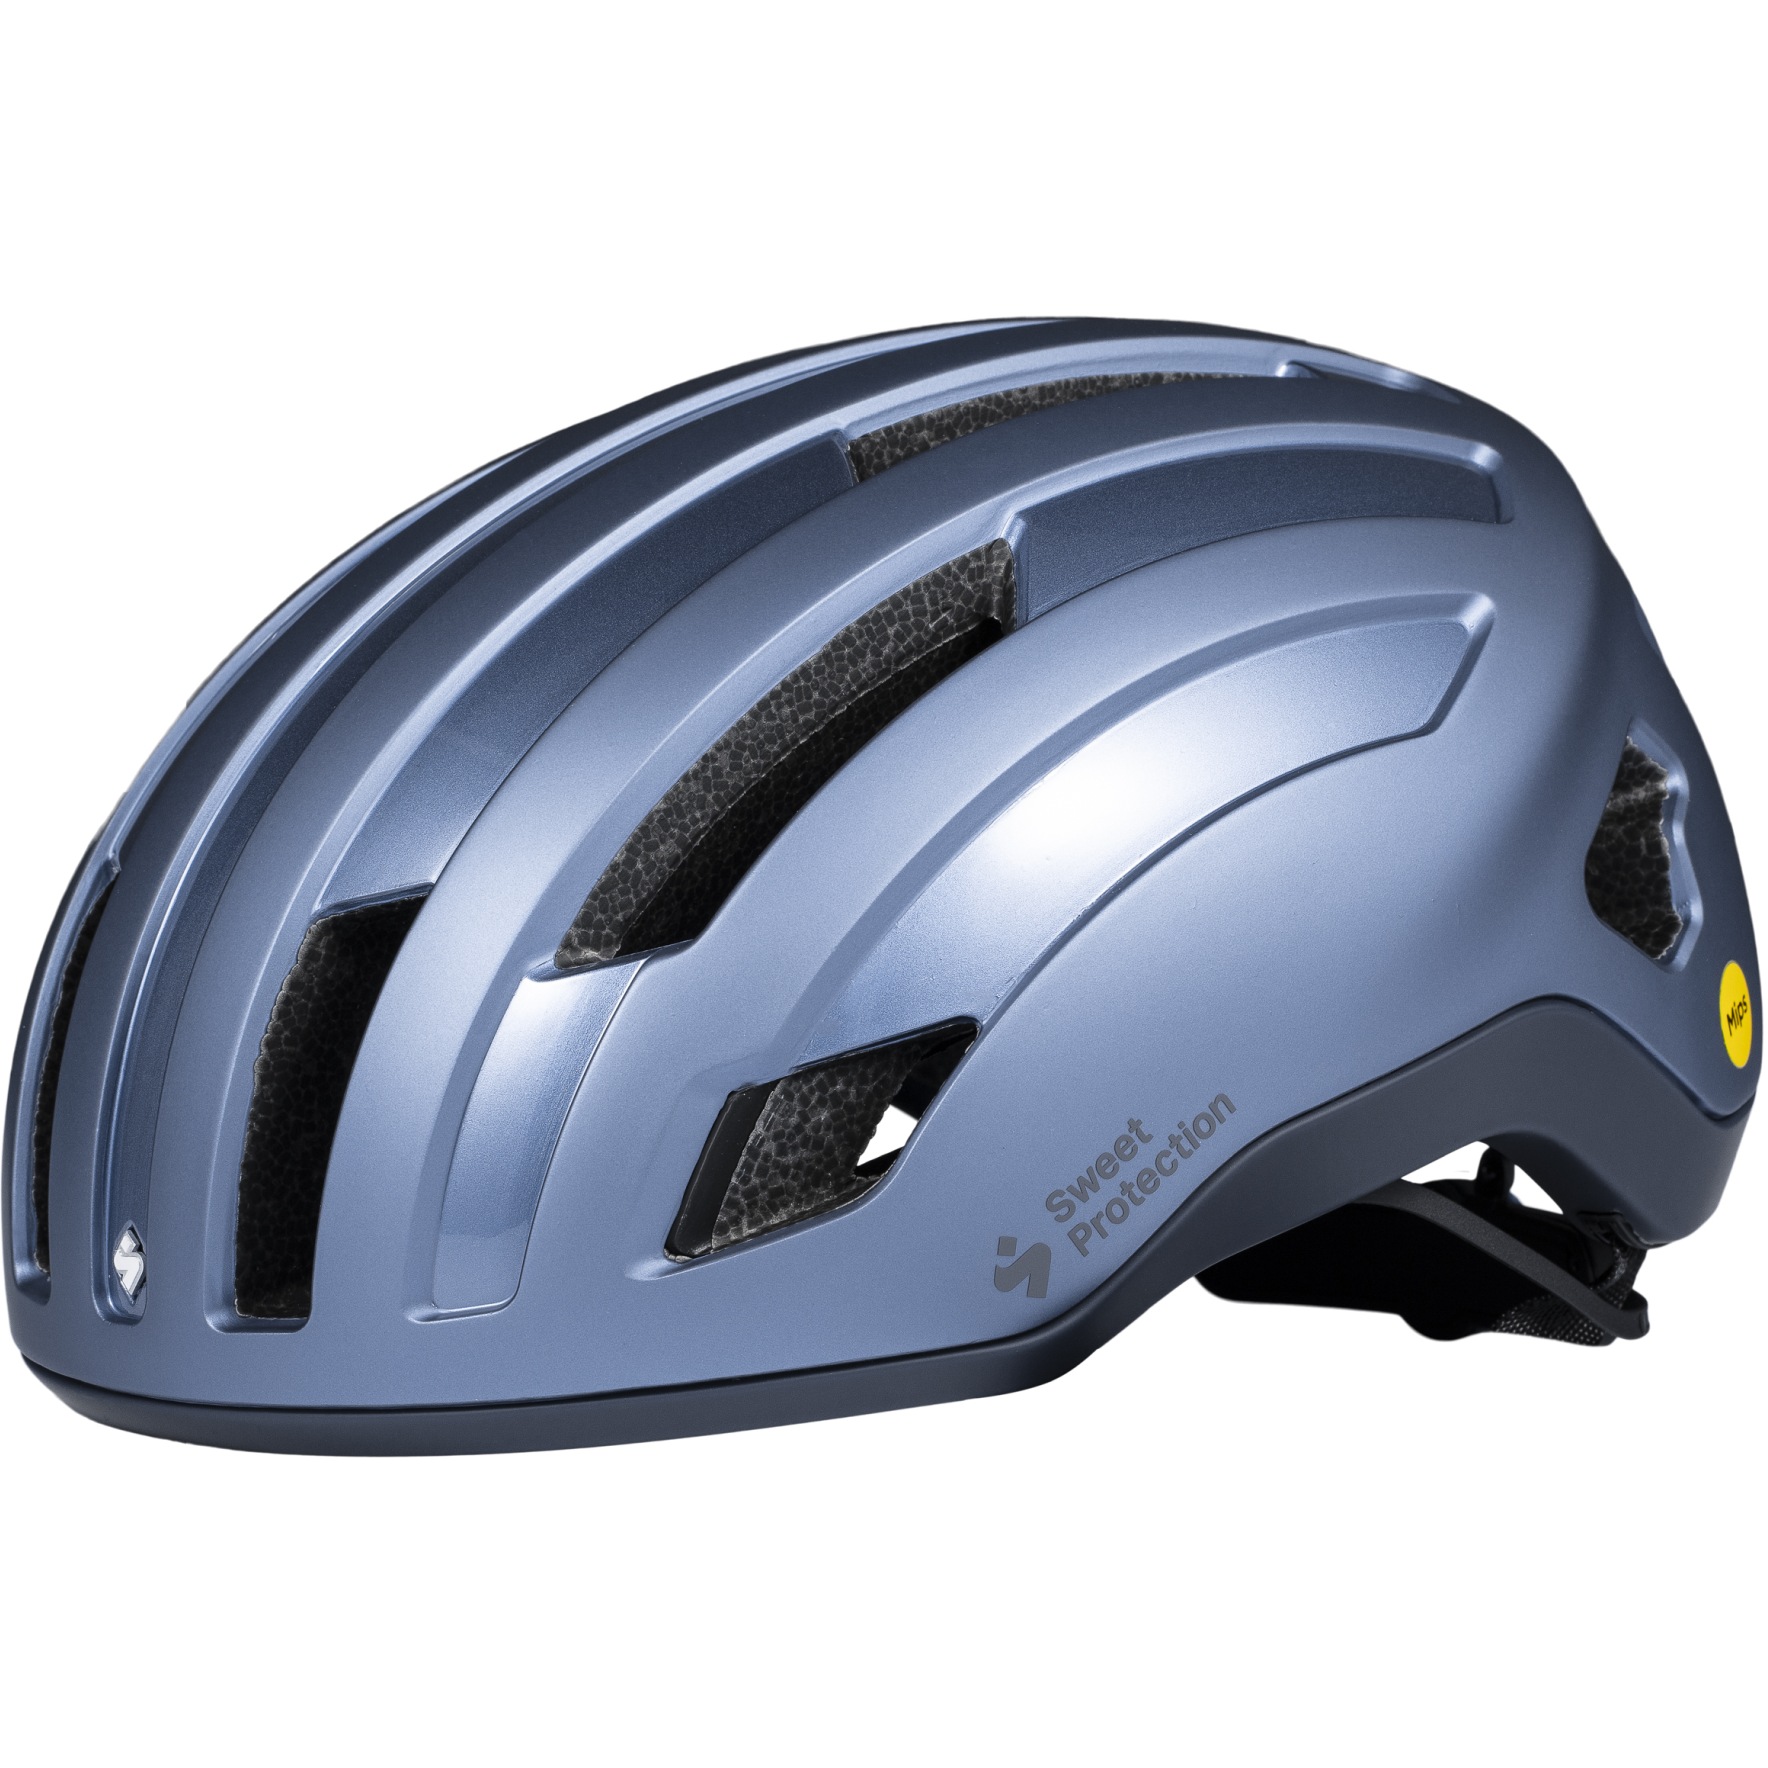 Productfoto van SWEET Protection Outrider MIPS Helm - Flare Metallic